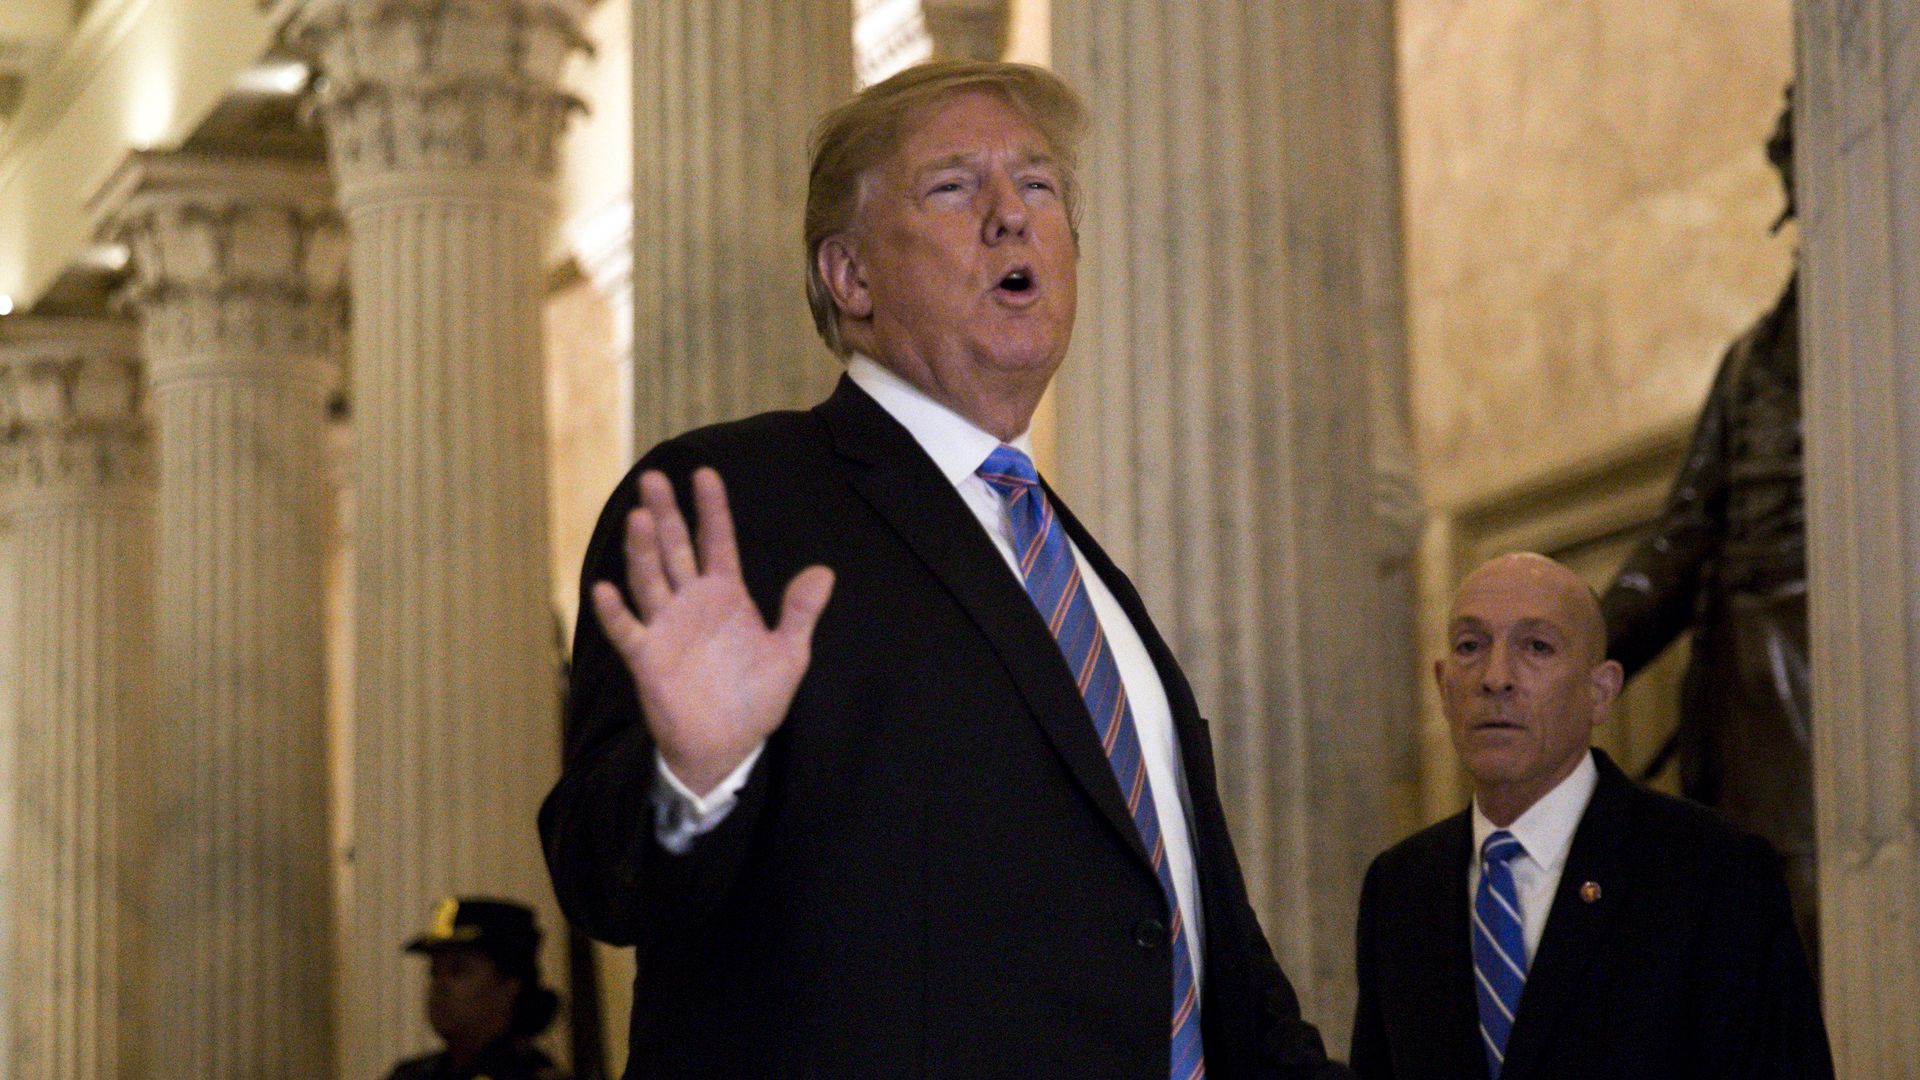 President Trump gestures while chatting on Capitol Hill